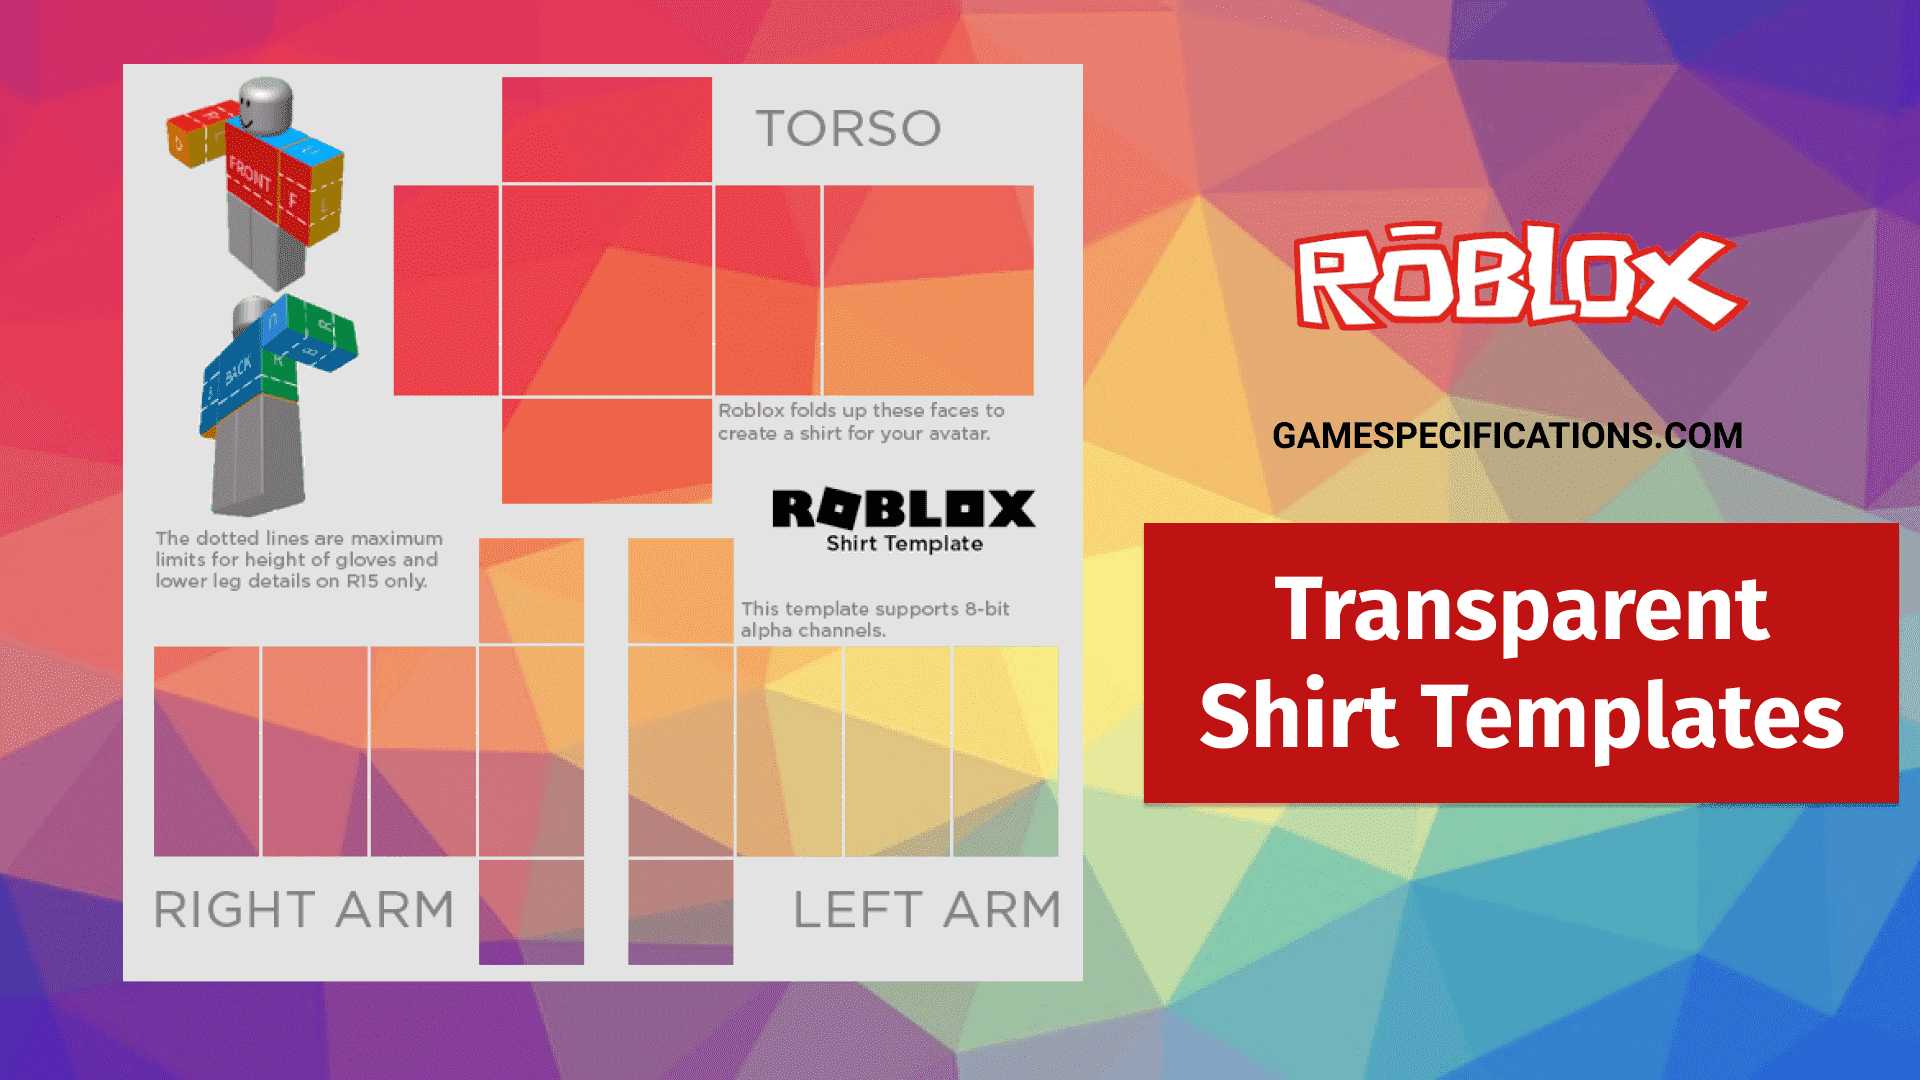 Roblox Transparent Shirt Templates And How To Make Them Game Specifications - new roblox shirt template